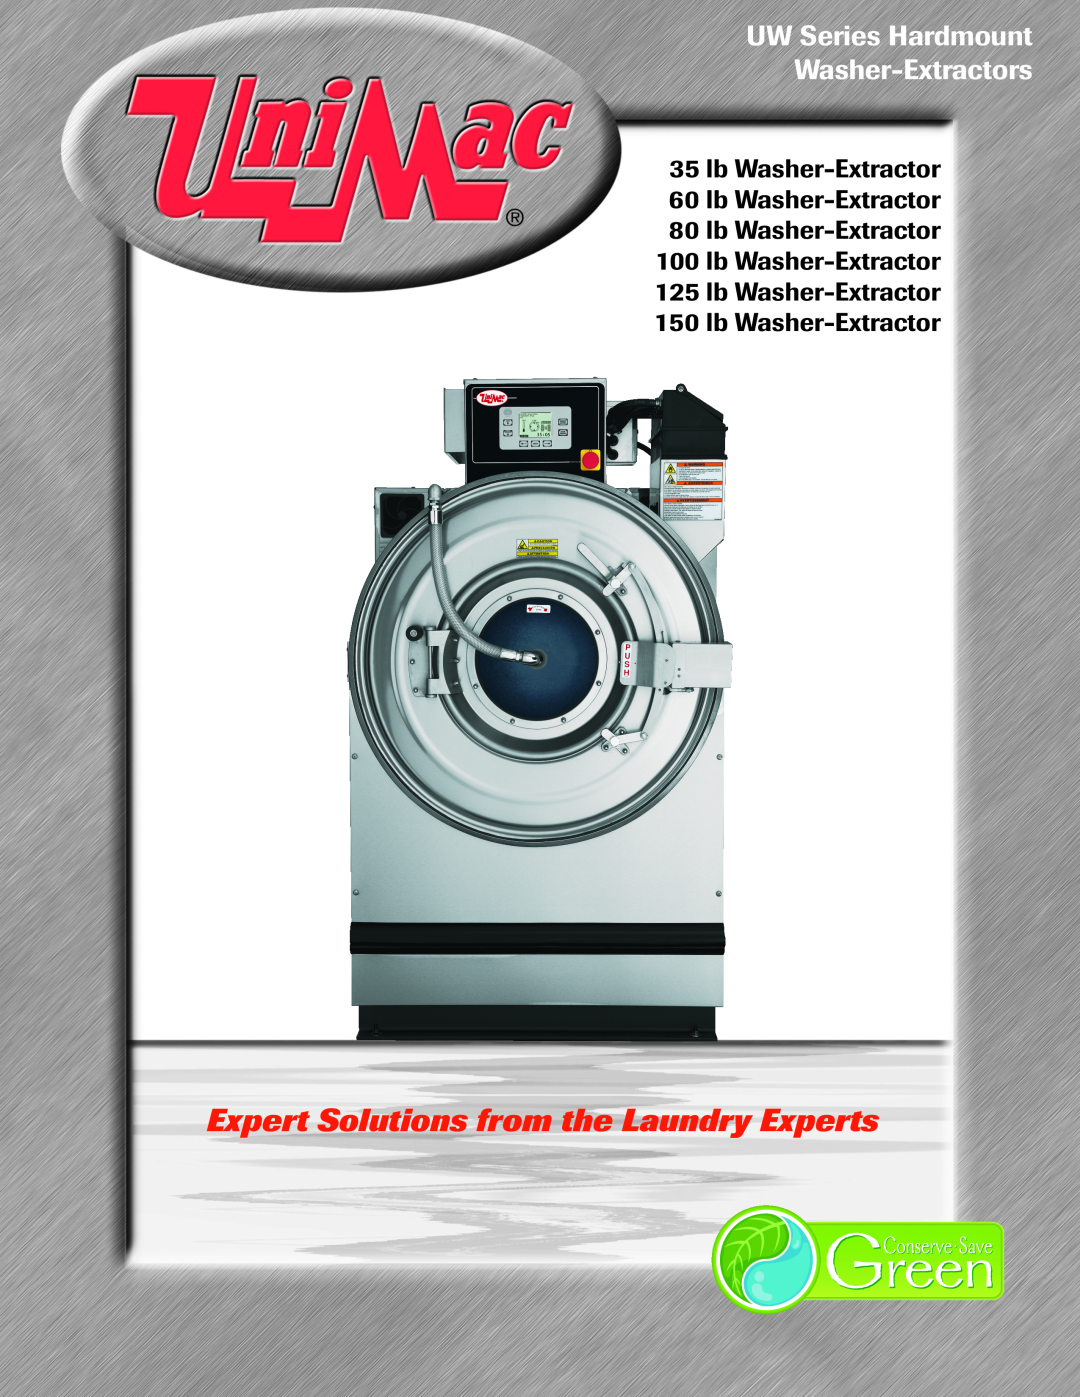 Unimac 35 LB manual Expert Solutions from the Laundry Experts, UW Series Hardmount Washer-Extractors, lb Washer-Extractor 